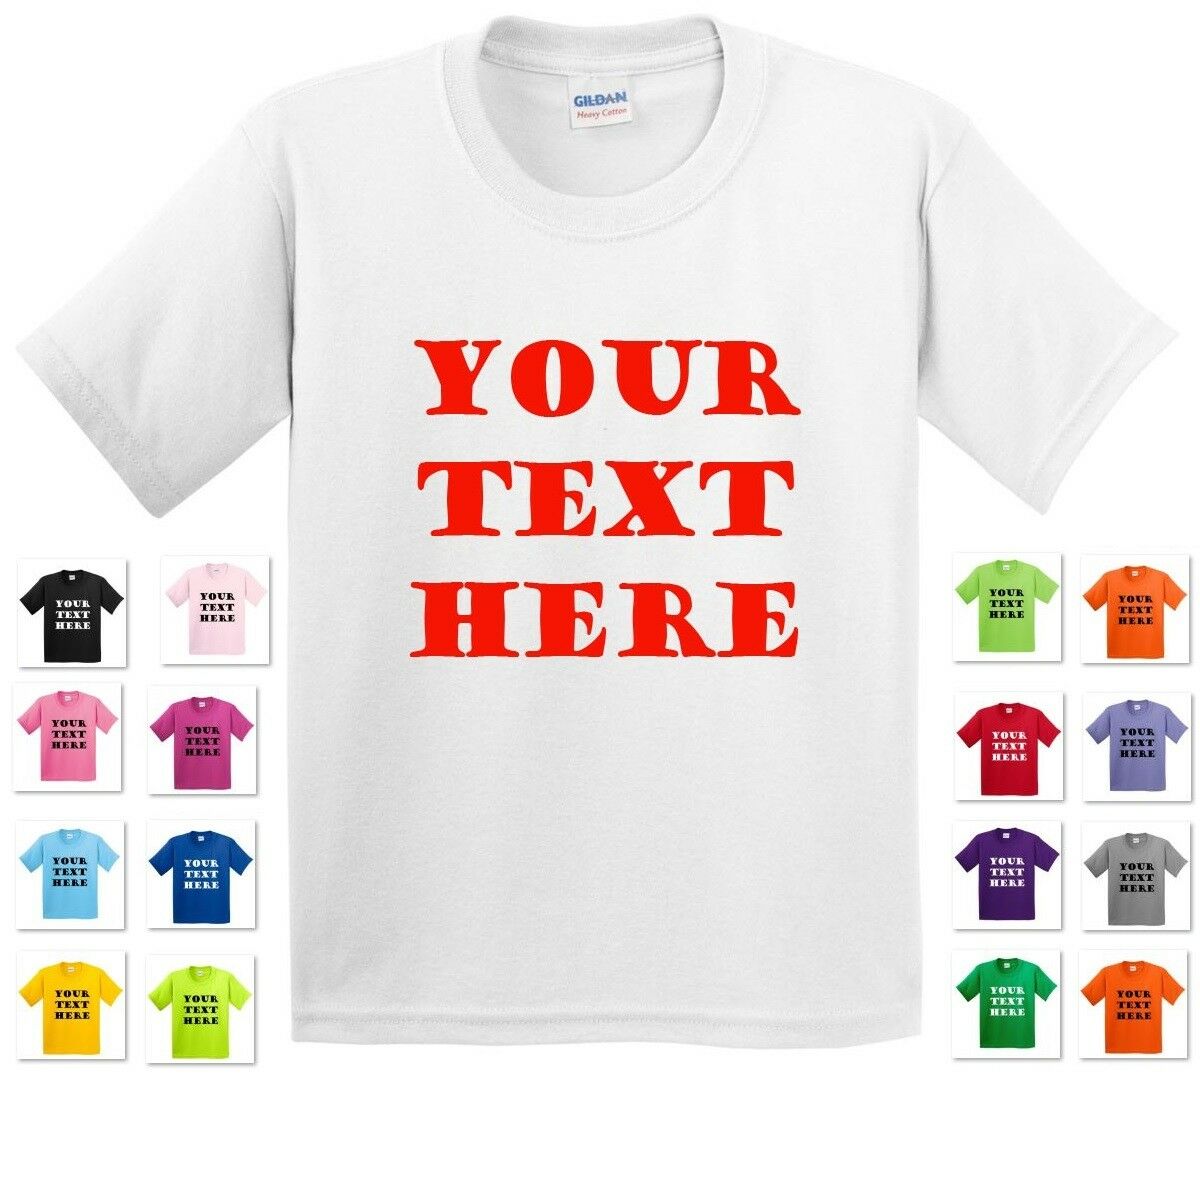 Youth Kids Personalized Custom Print Your Own Text On A T-shirt Customized Tee